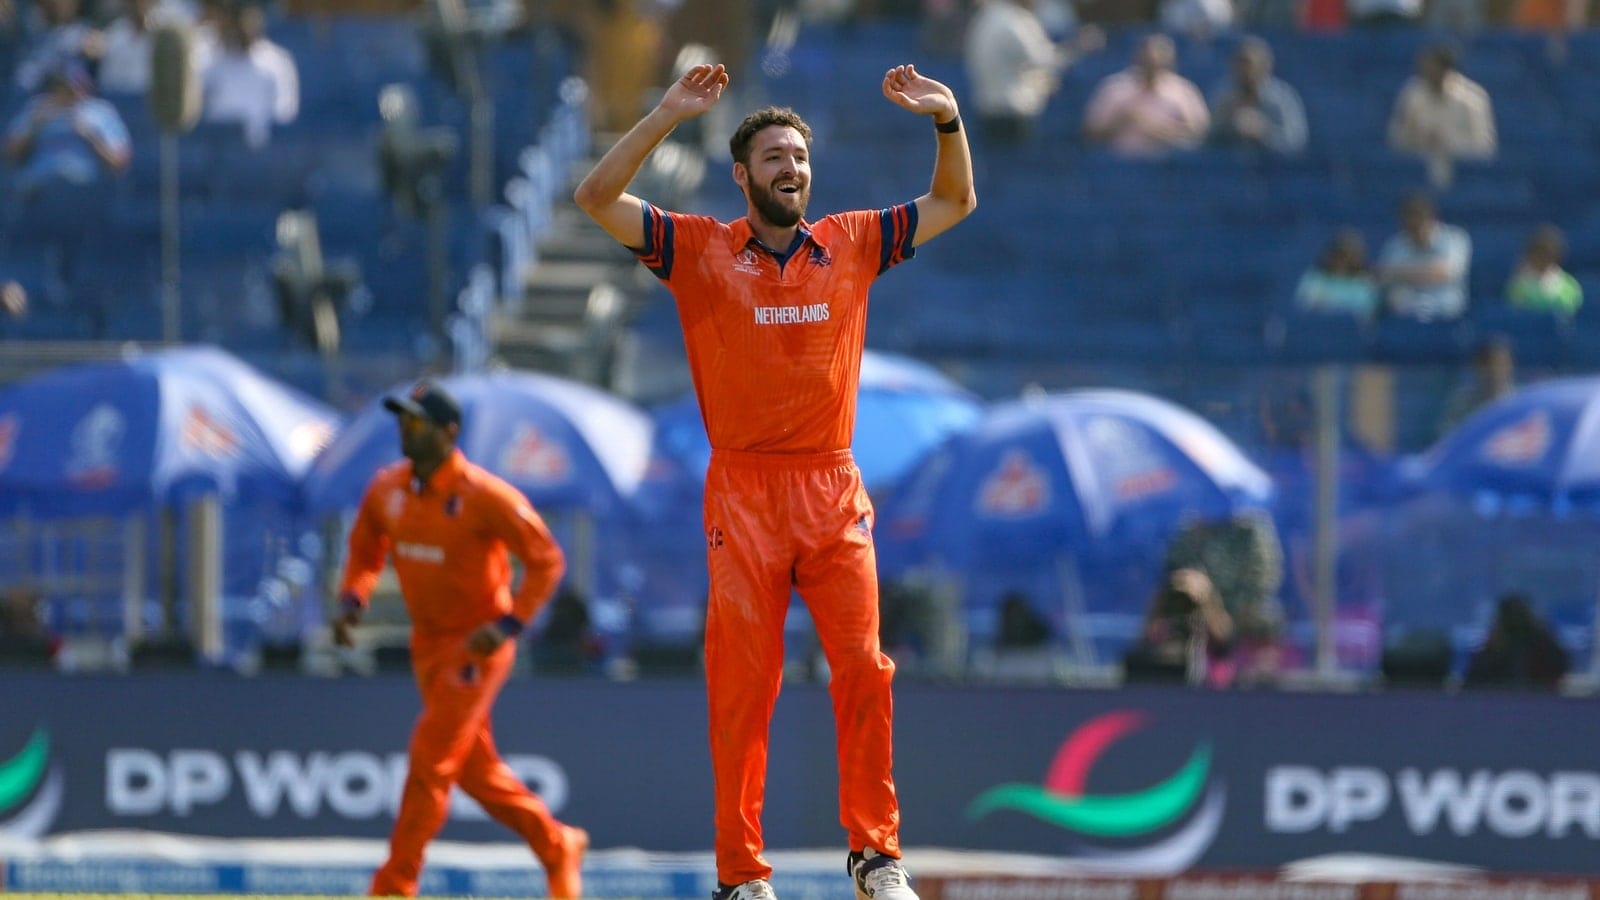 Zomato honours Netherlands cricketer Paul van Meekeren who worked for Uber Eats to brave winter months